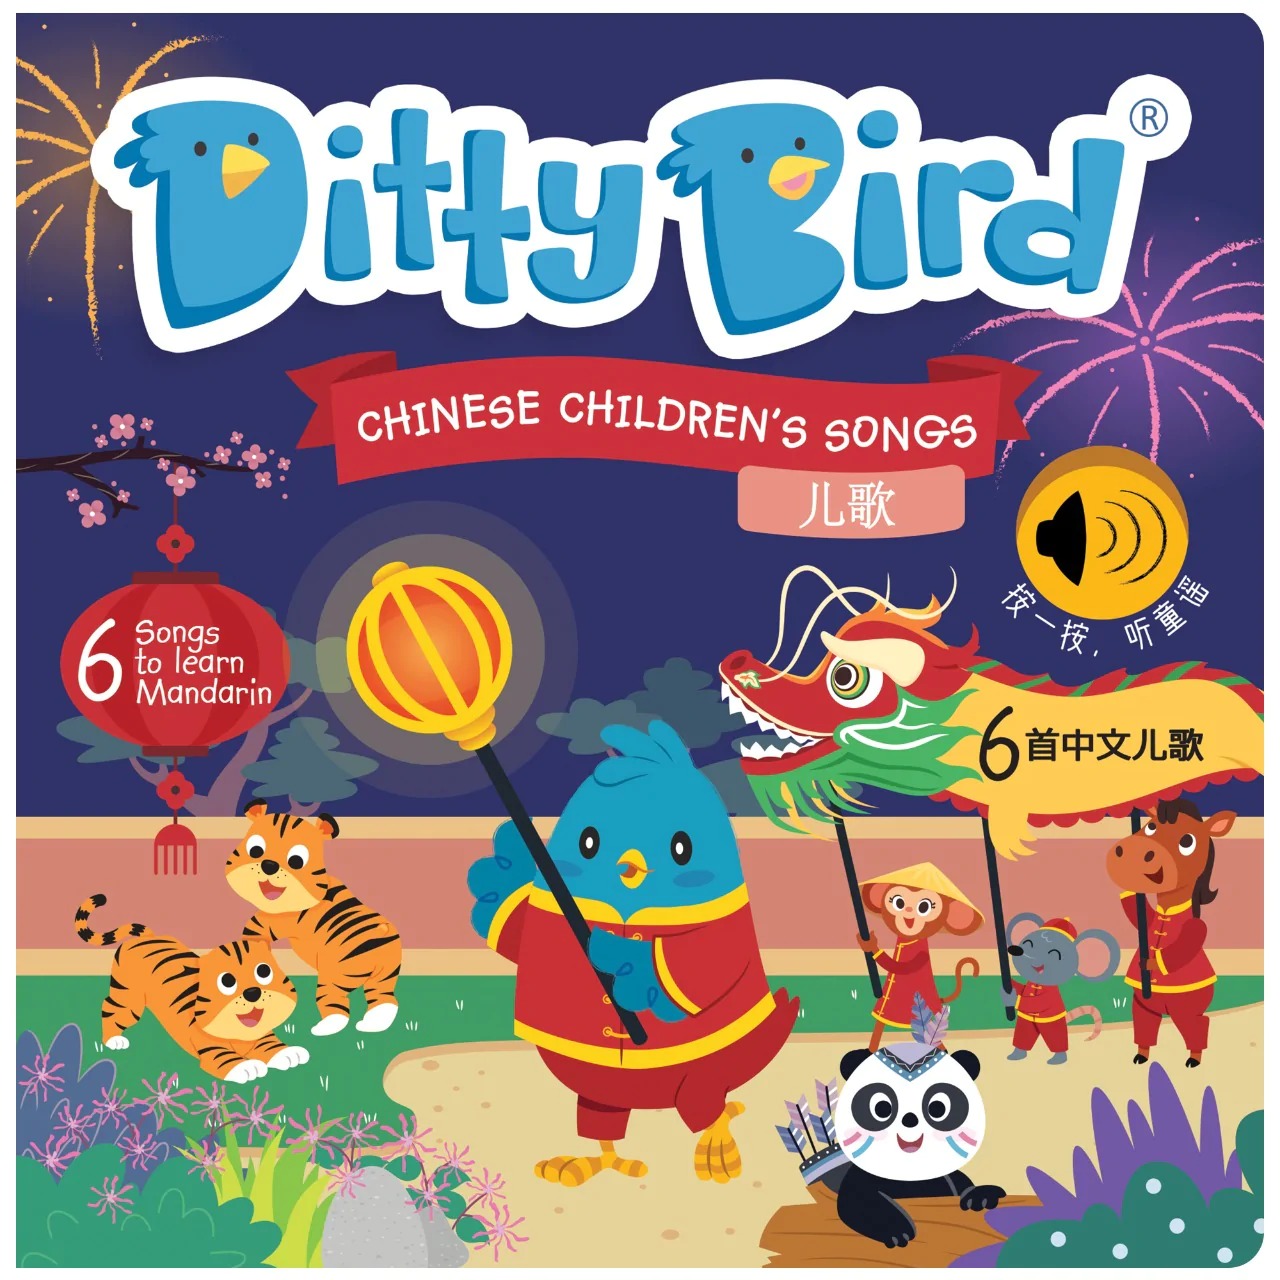 Sounds Book - Chinese Children's Songs in Mandarin